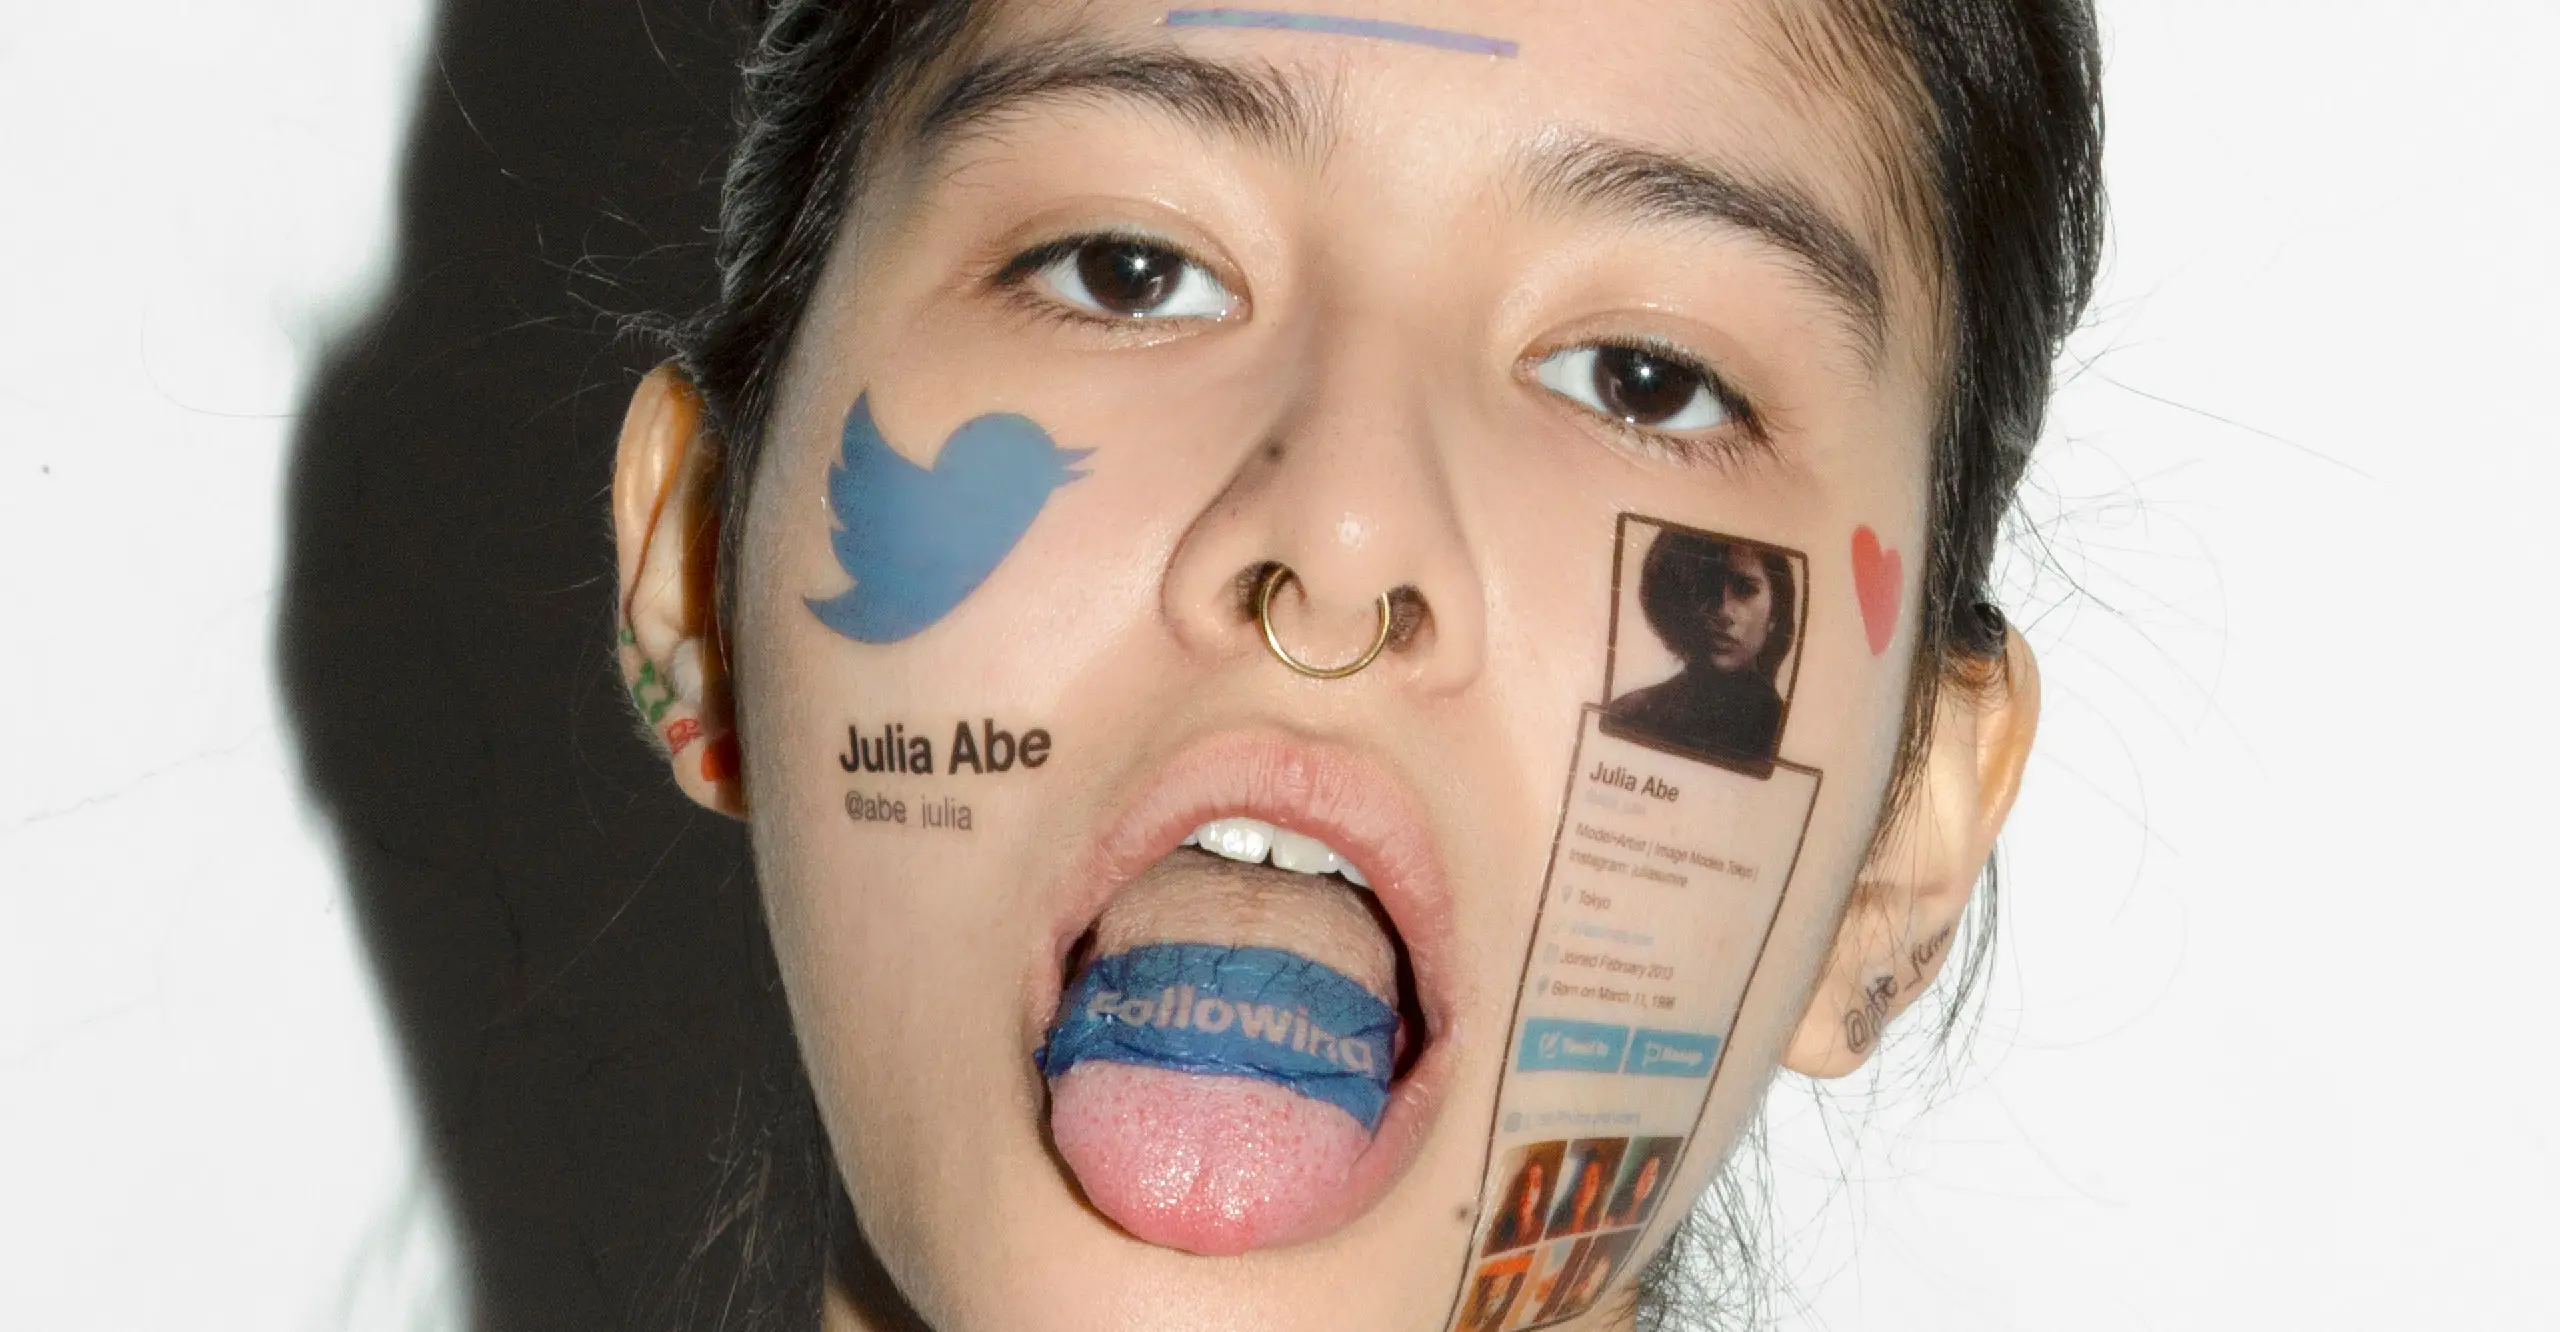 Photograph of a person's face with their tongue stuck out and Twitter logos tattooed onto their tongue, cheeks and forehead.